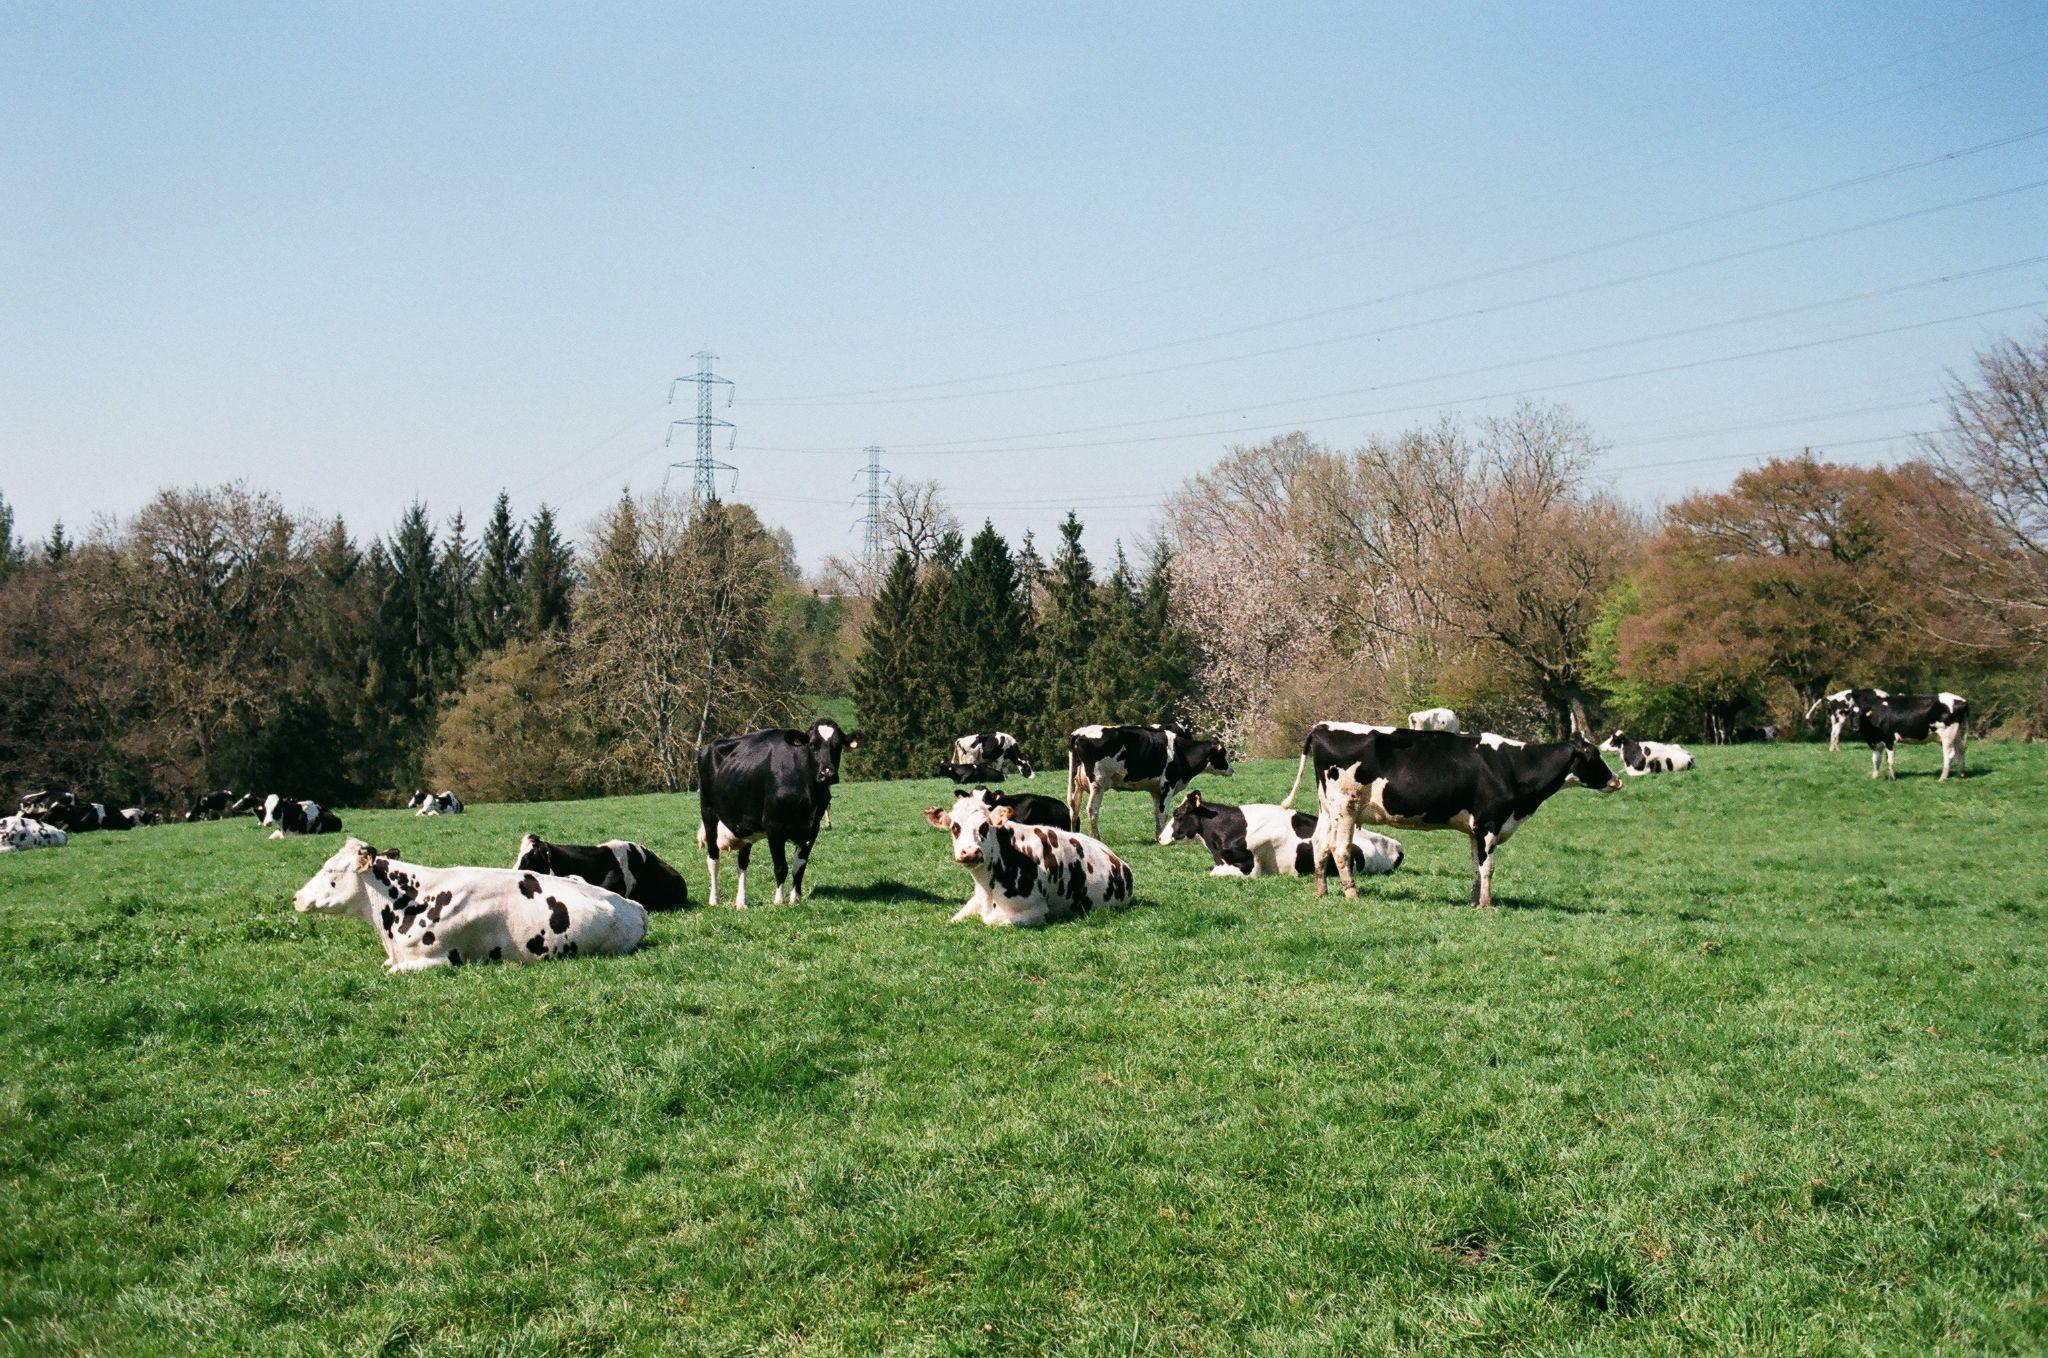 Many cows grazing in the field